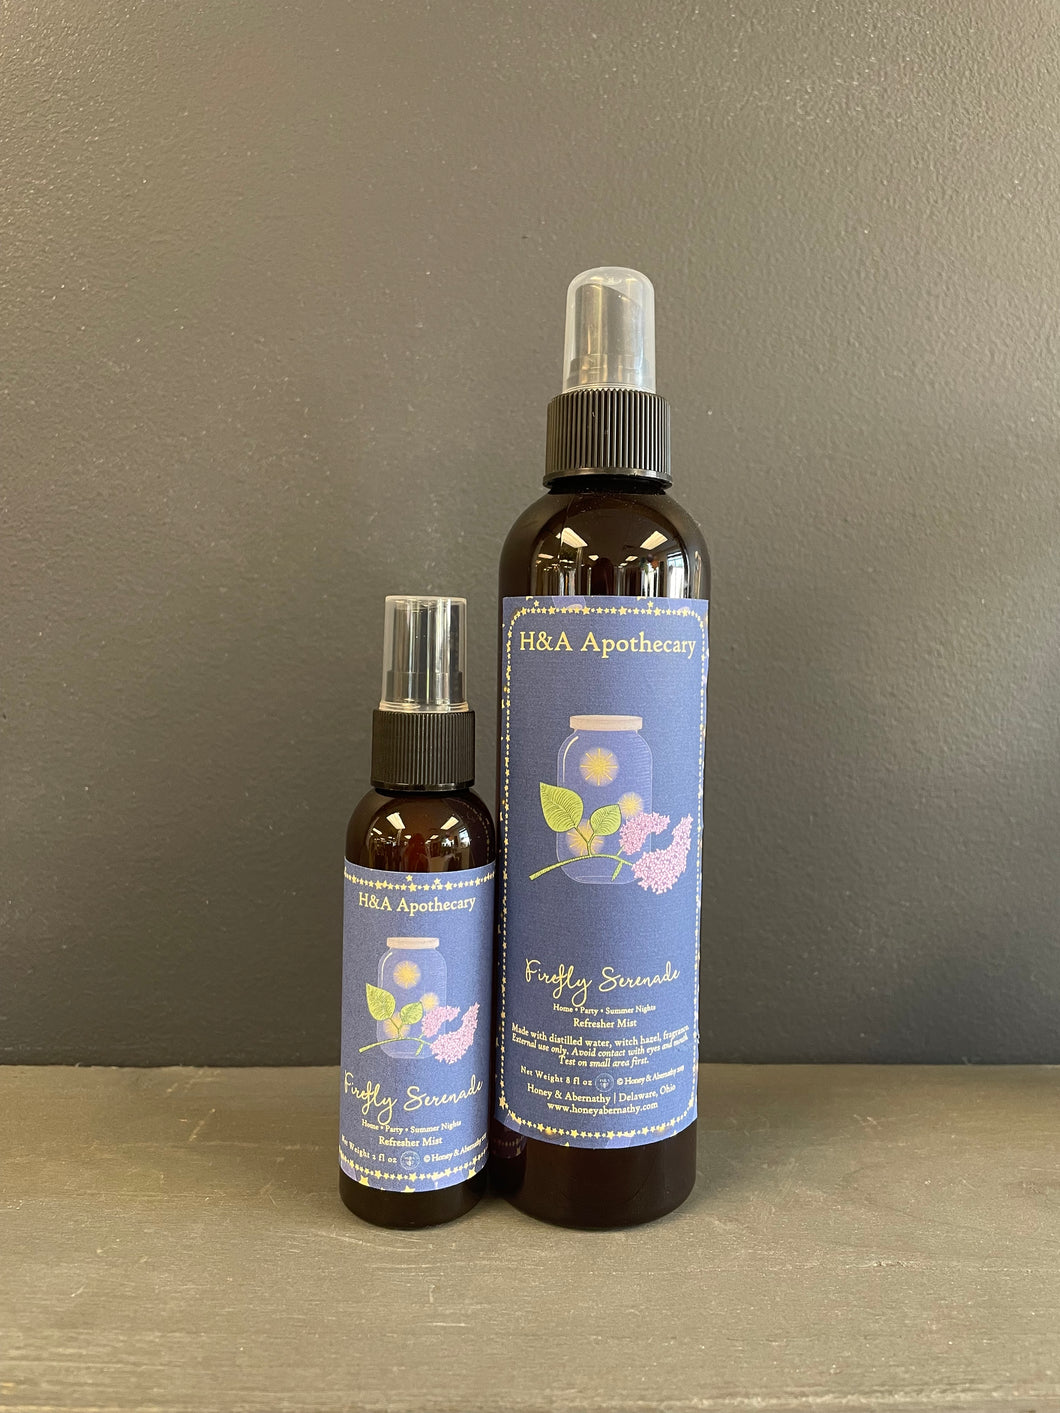 H&A Apothecary Firefly Serenade Refresher Mist